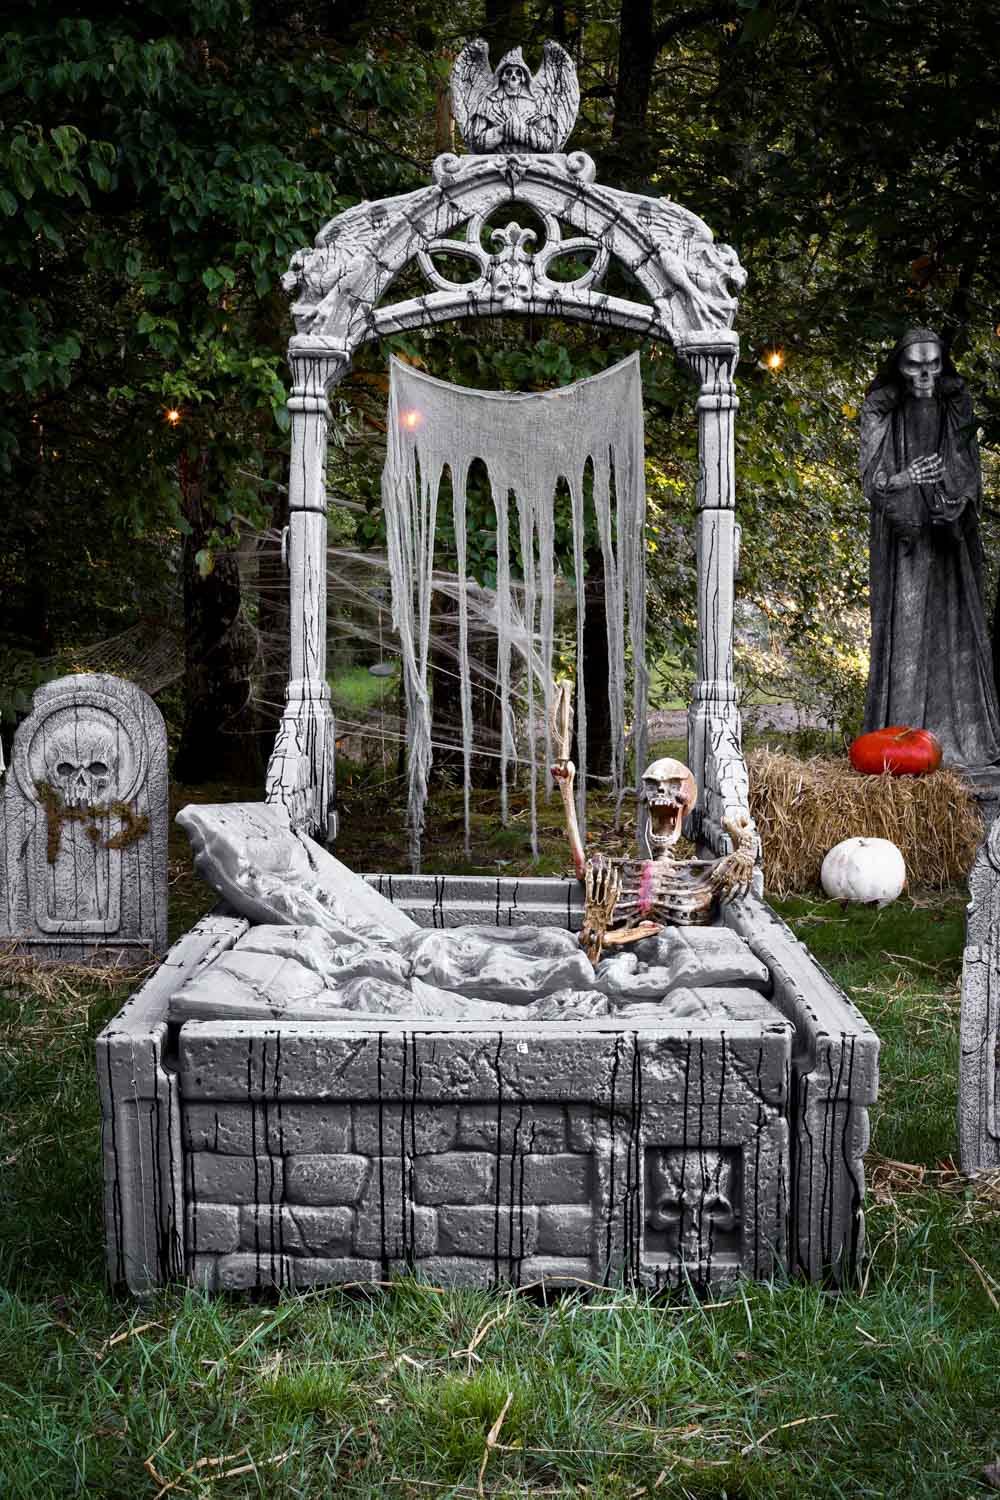 Transform Your Front Yard Into a Haunted Graveyard for Halloween ...